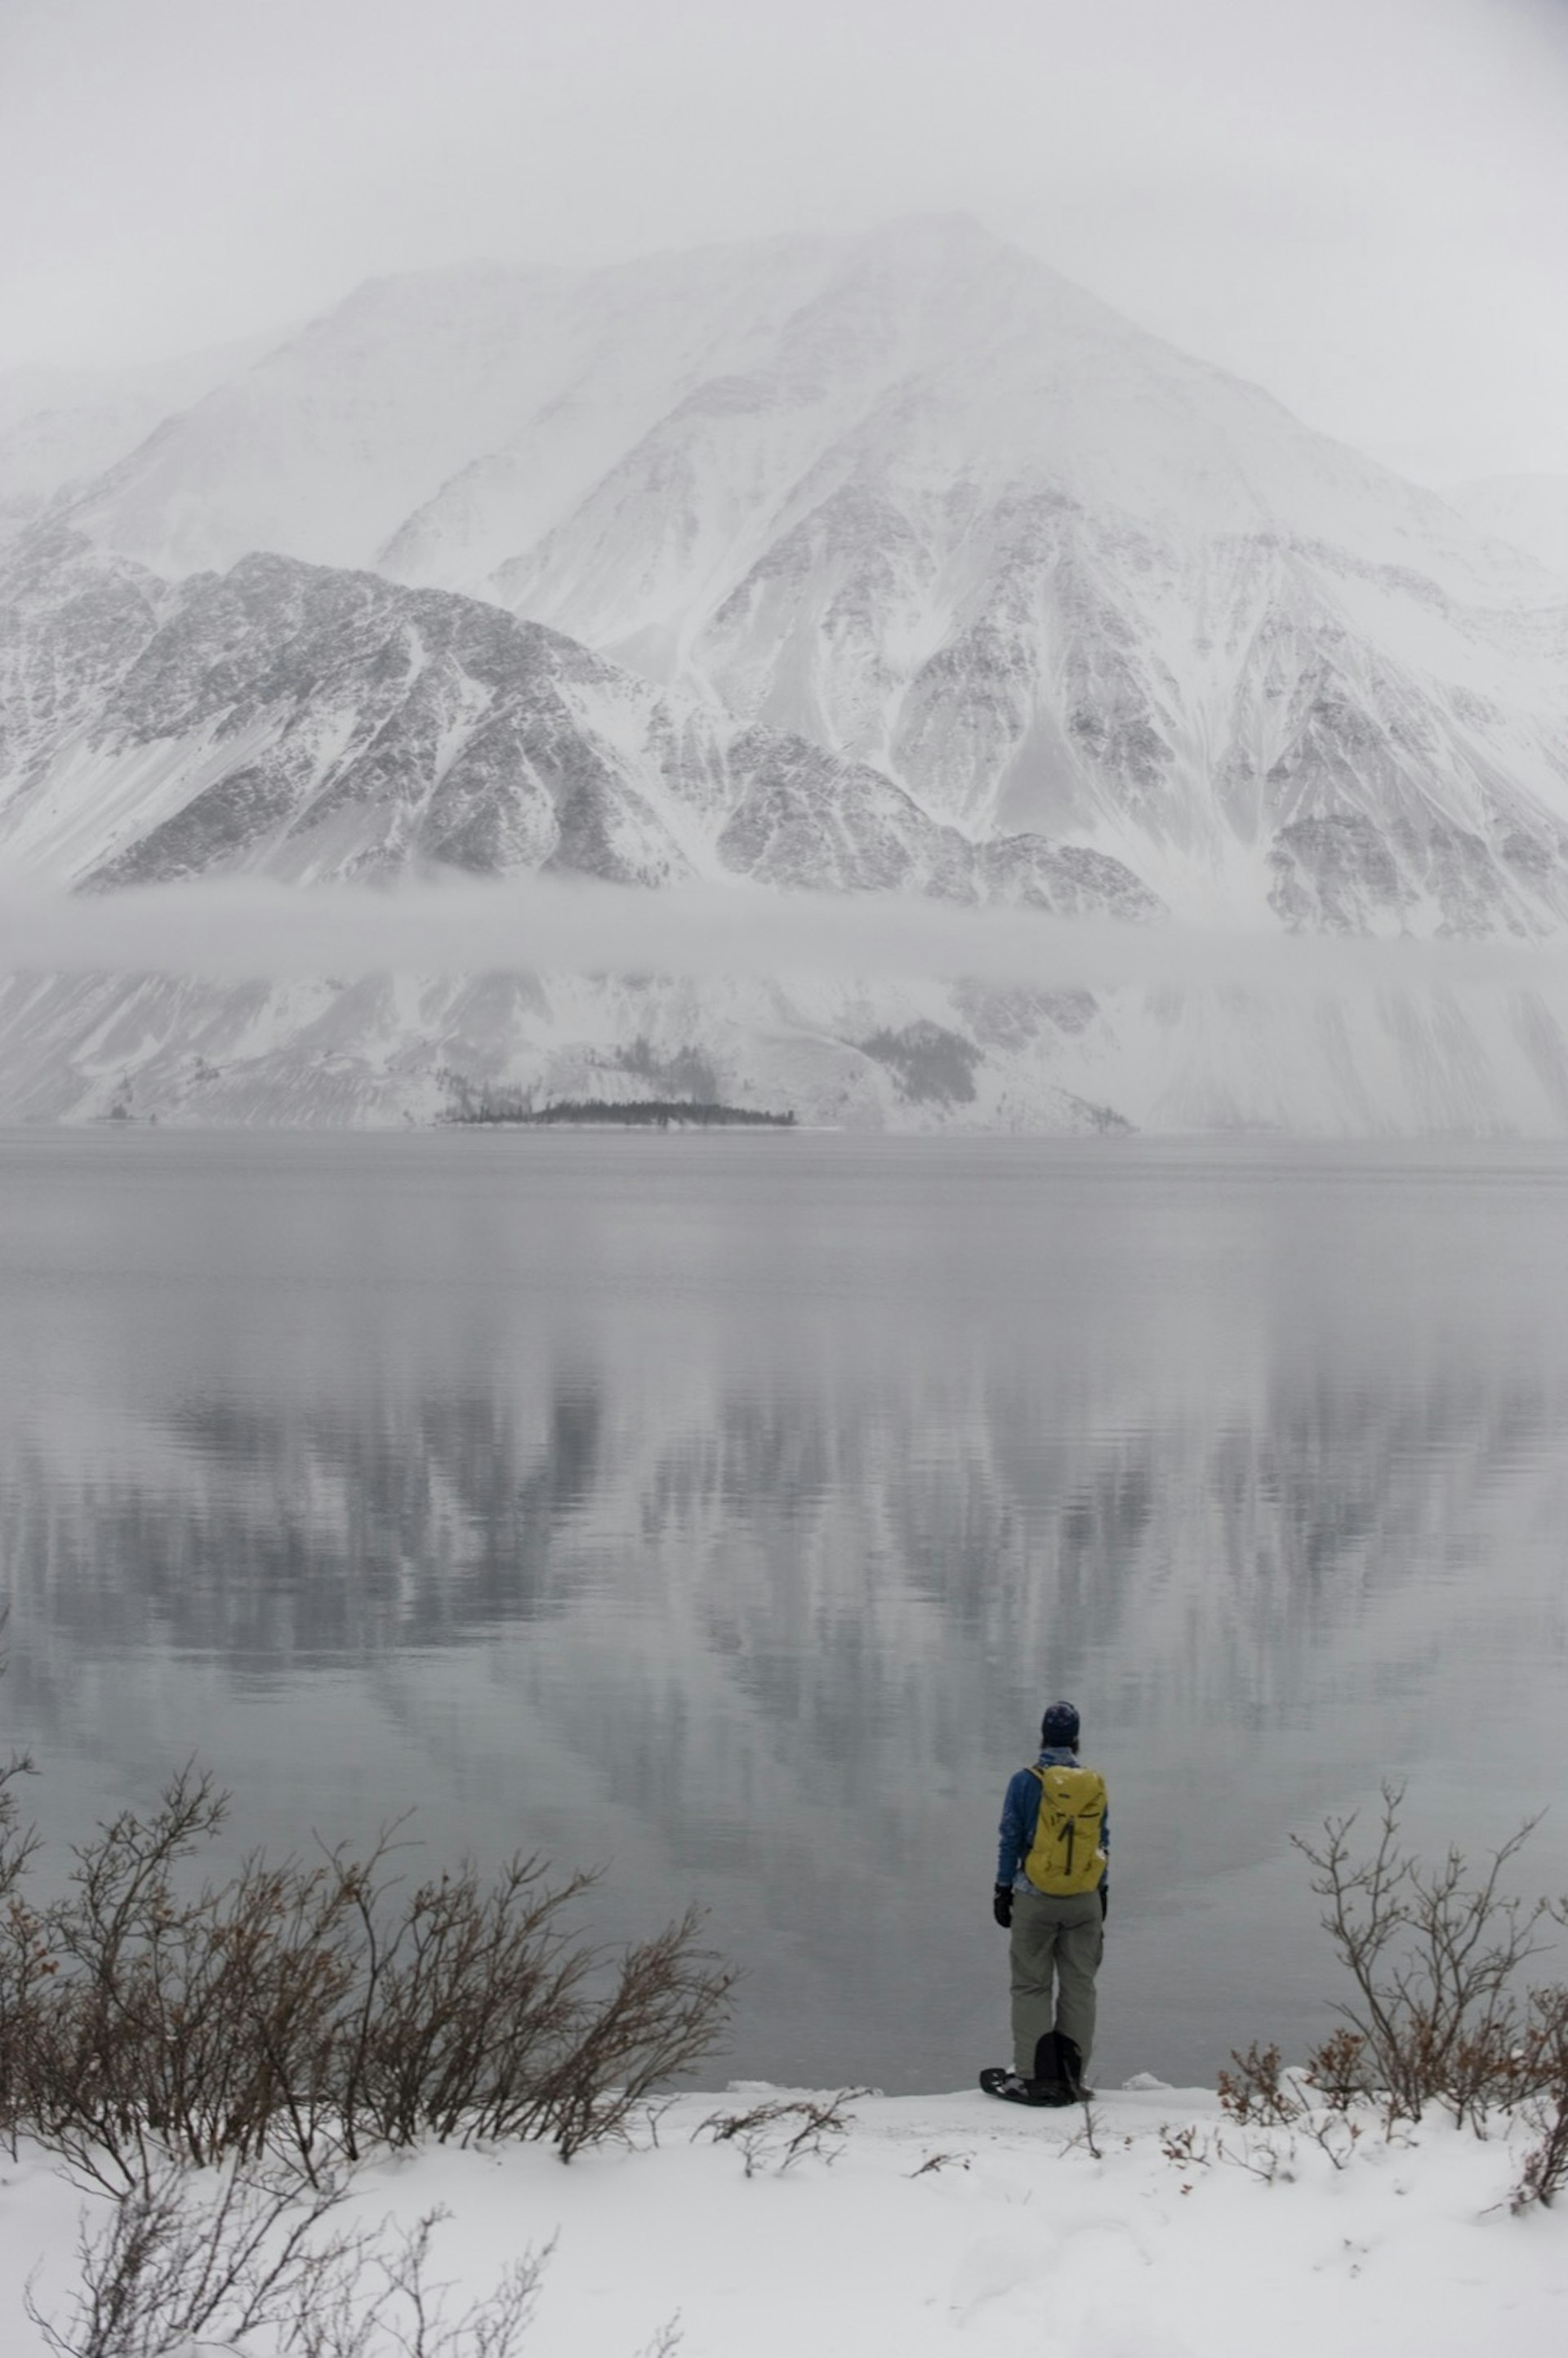 A woman snowshoeing in winter looks out over frozen Kathleen Lake, with a snow-covered mountain in the background reflected in the ice © Peter Mather / Getty Images